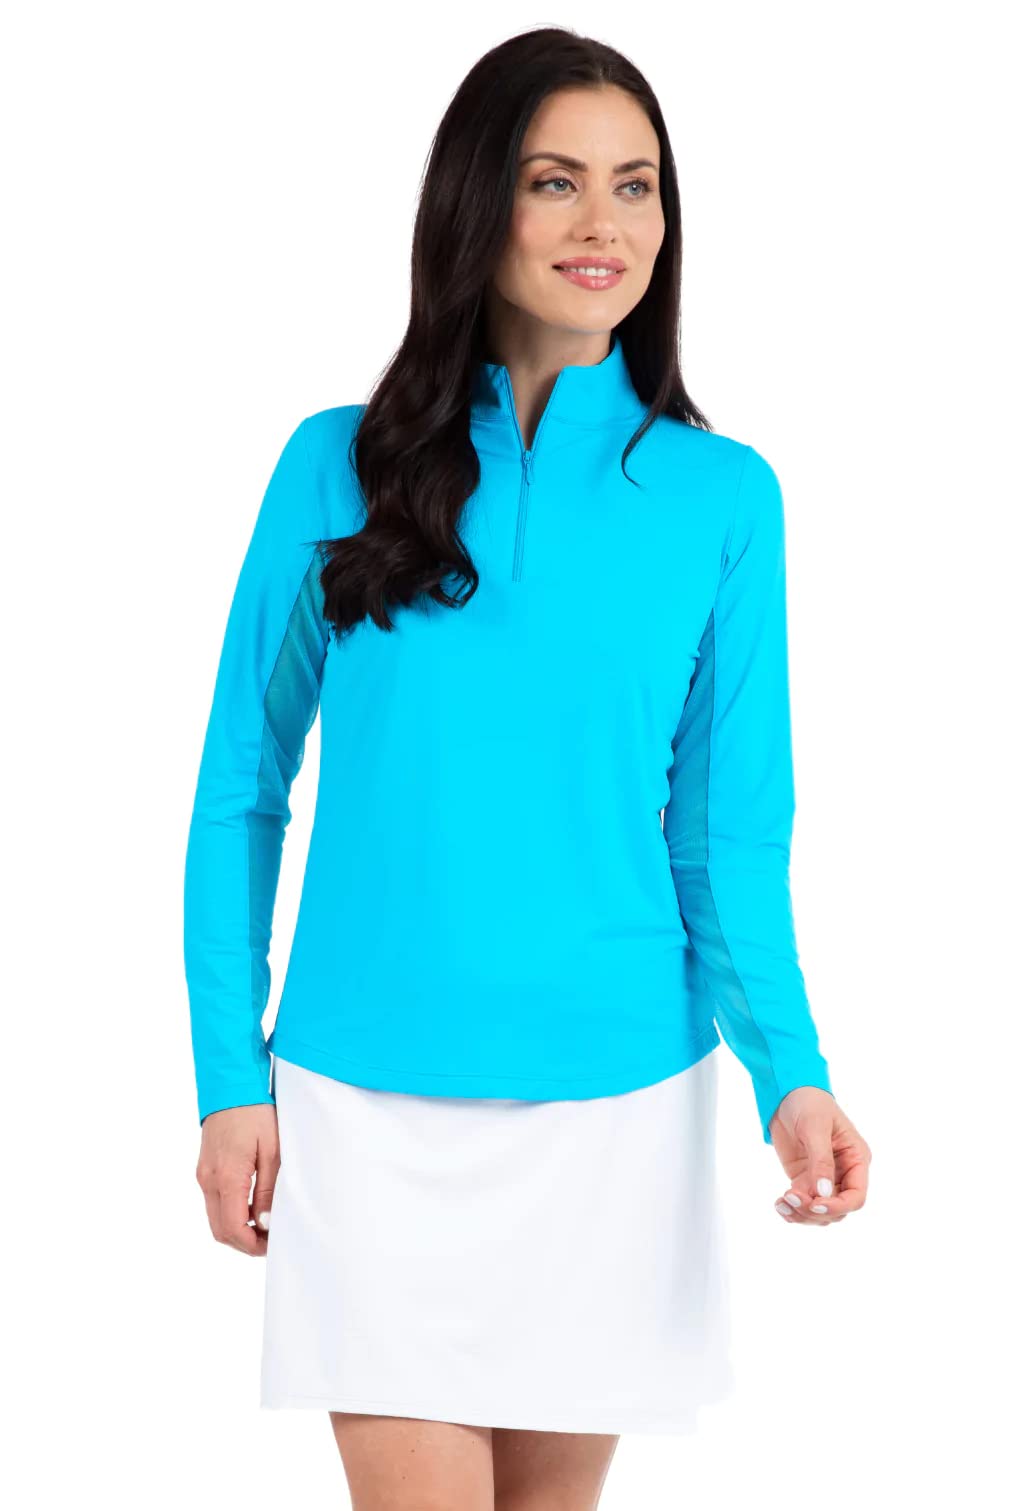 IBKUL Athleisure Wear Sun Protective UPF 50+ Icefil Cooling Tech Long Sleeve Mock Neck Top with Under Arm Mesh 80000 Turquoise Solid XS